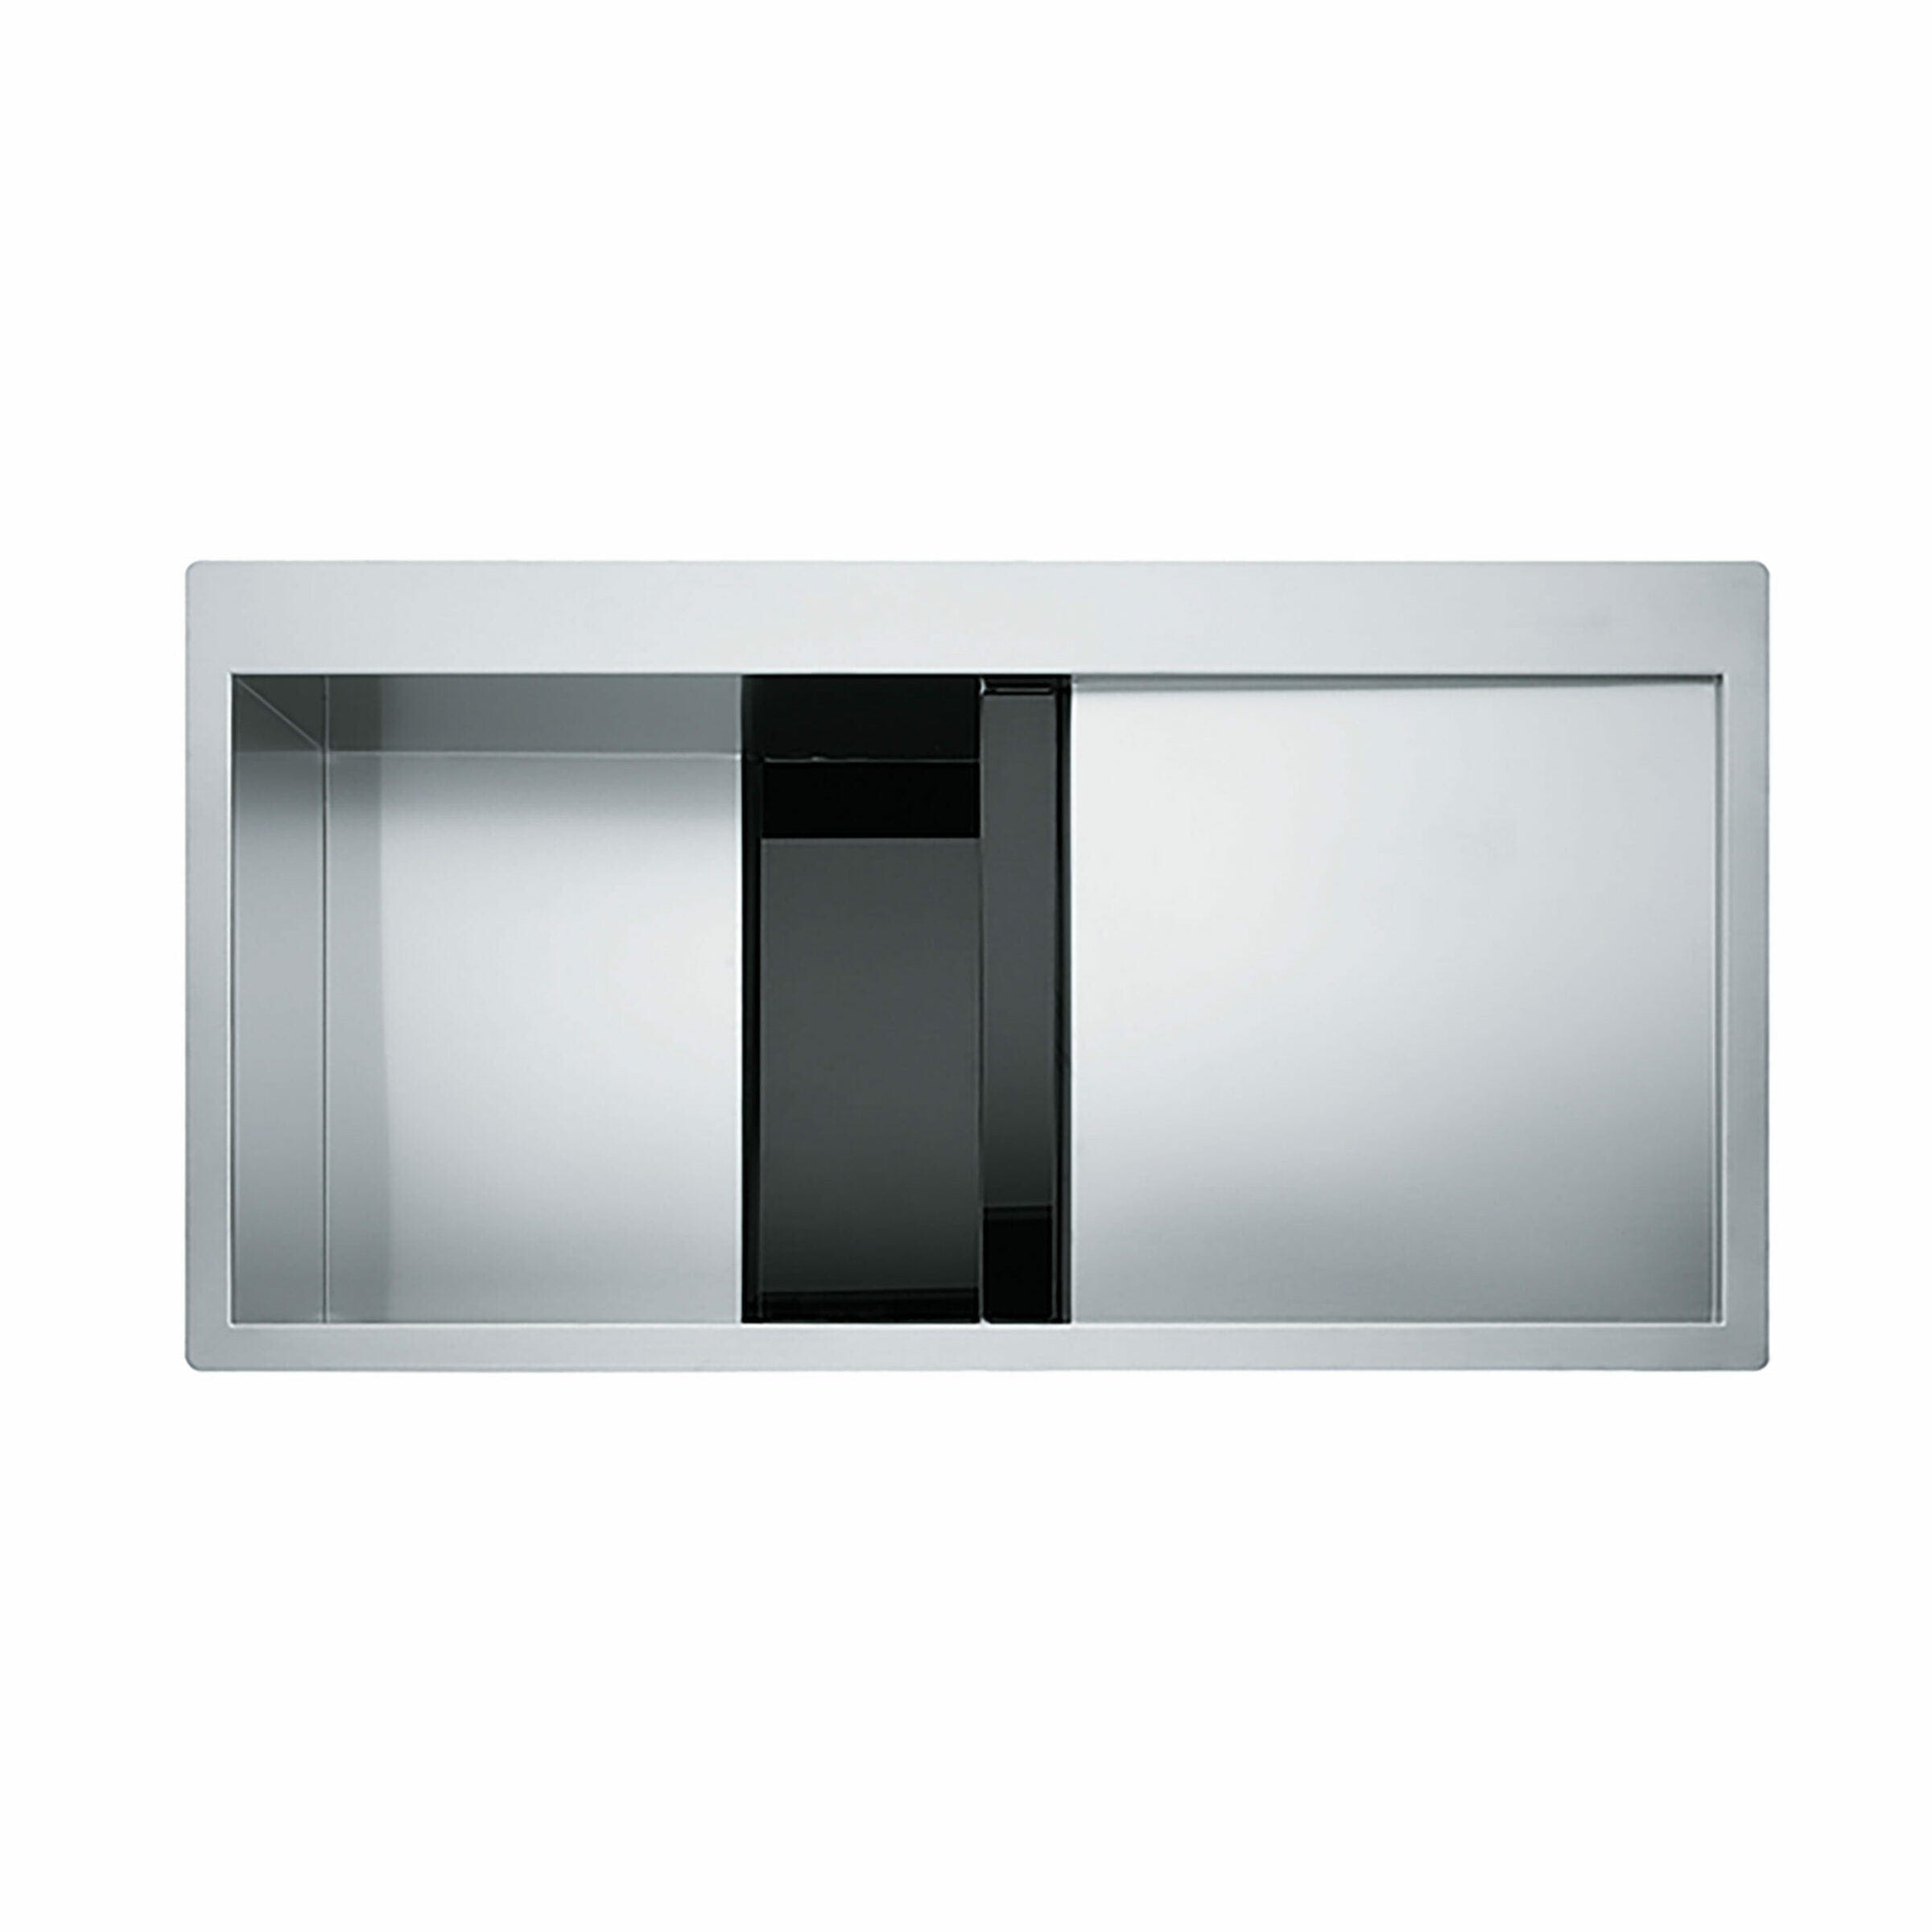 Franke Crystal Line Kitchen Sink - CLV 214 Black Glass & Stainless Steel | Supply Master | Accra, Ghana Kitchen Sink Buy Tools hardware Building materials